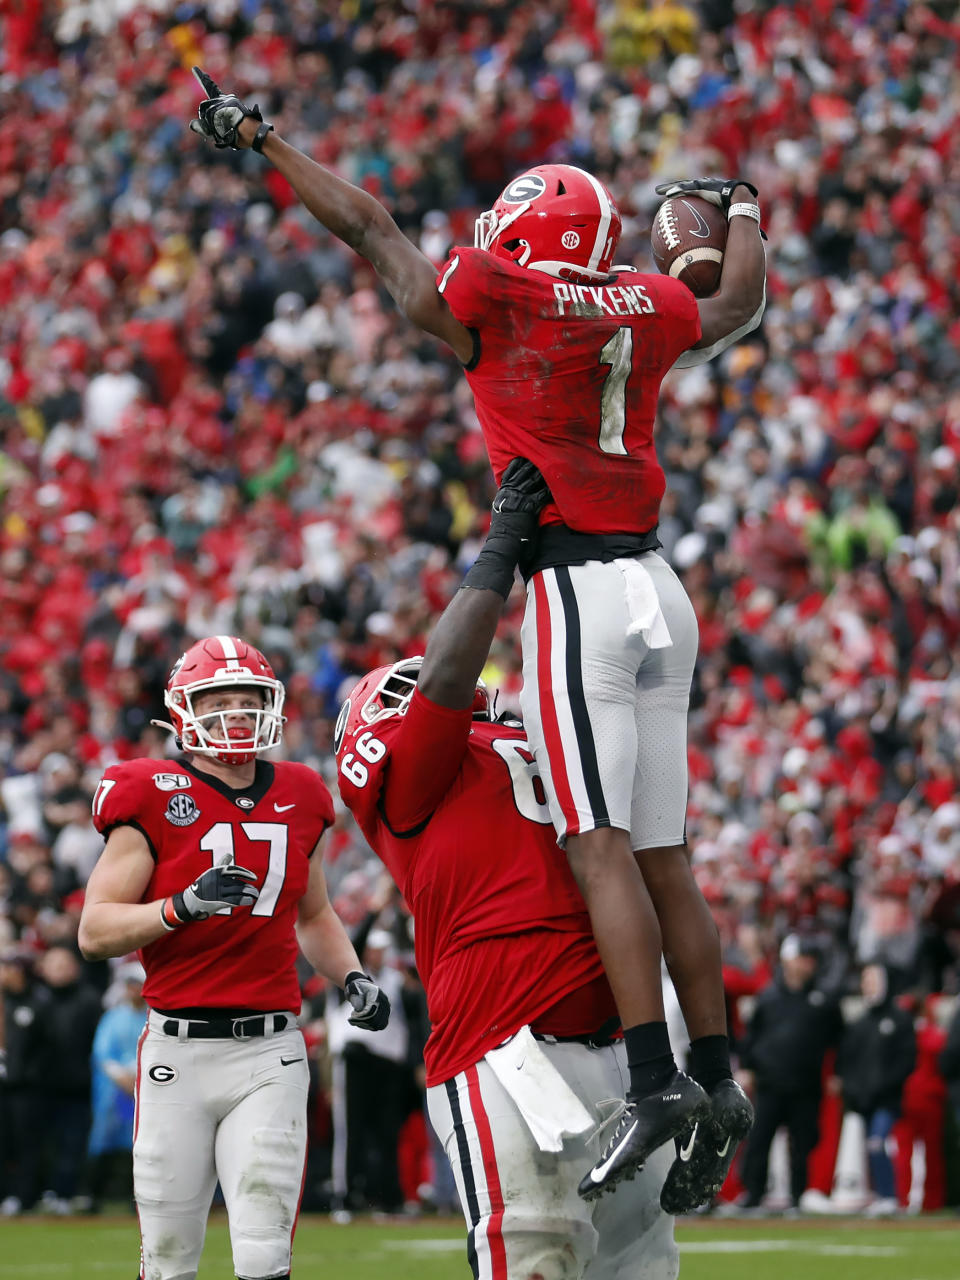 Georgia wide receiver George Pickens (1) celebrates with offensive lineman Solomon Kindley (66) after catching a touchdown on a pass from quarterback Jake Fromm (17) during the first half of an NCAA college football game against Texas A&M, Saturday, Nov. 23, 2019, in Athens, Ga. (AP Photo/John Bazemore)